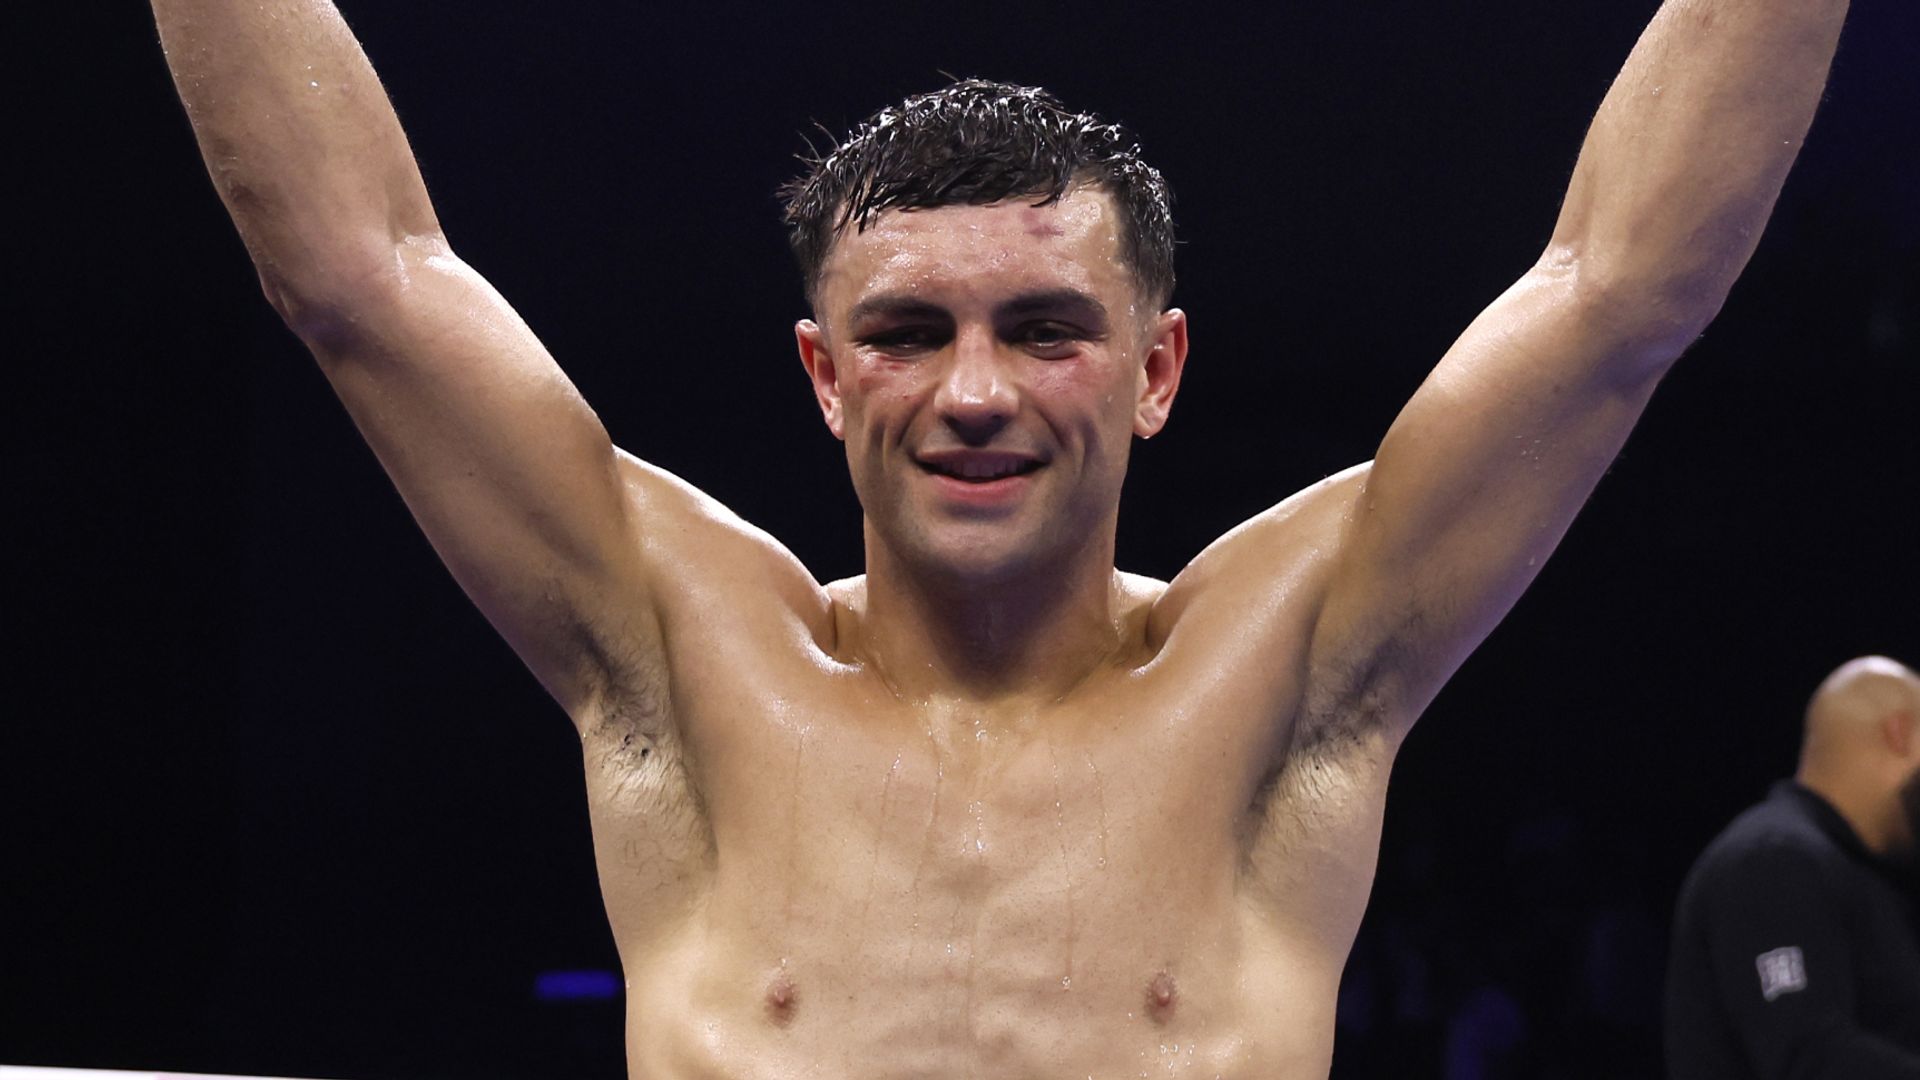 Catterall targets world title after epic Taylor rematch win